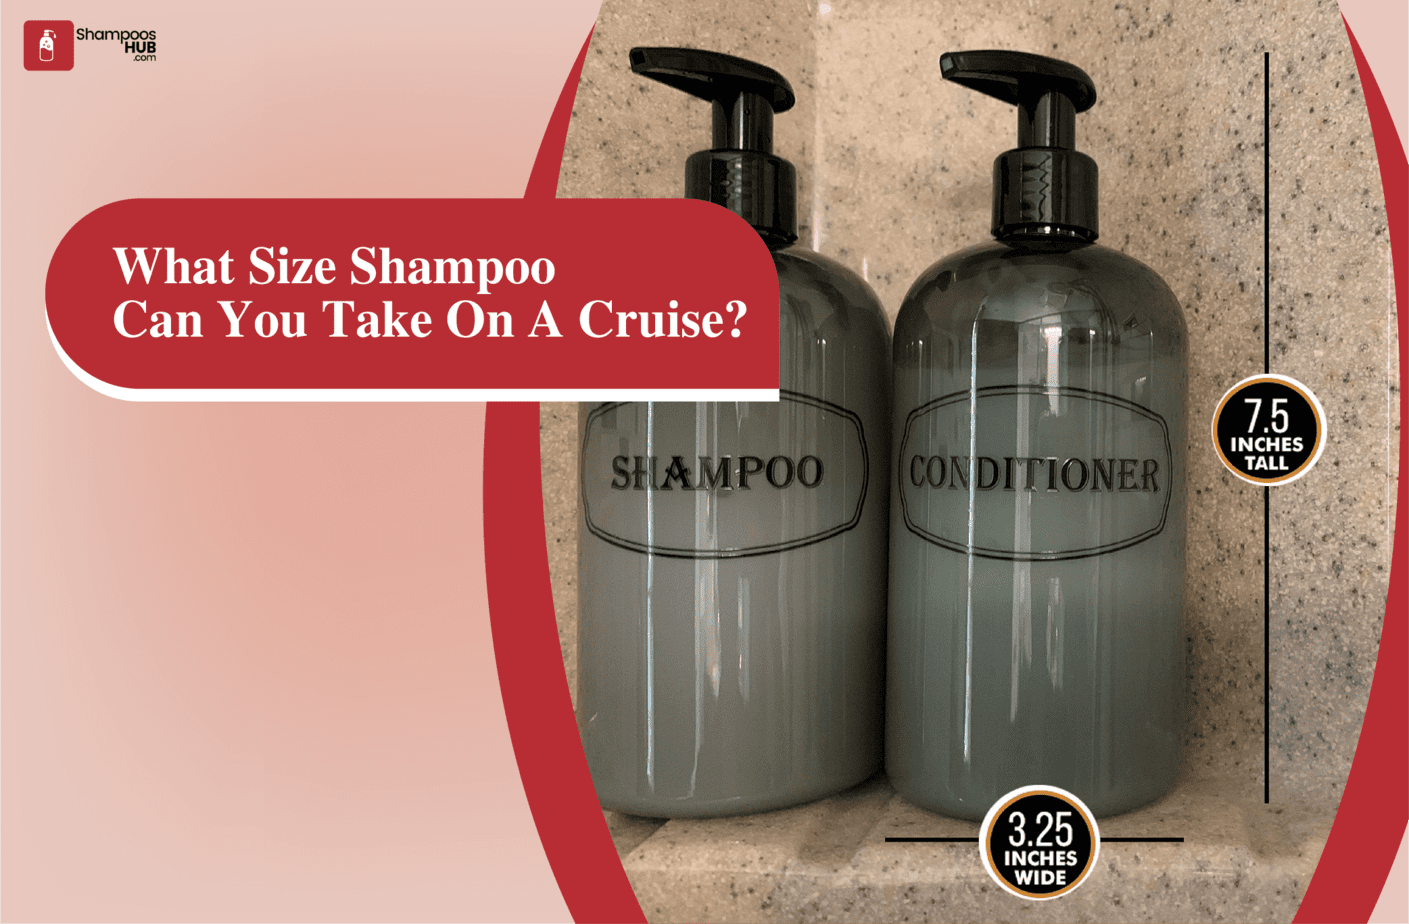 What Size Shampoo Can You Take On A Cruise?